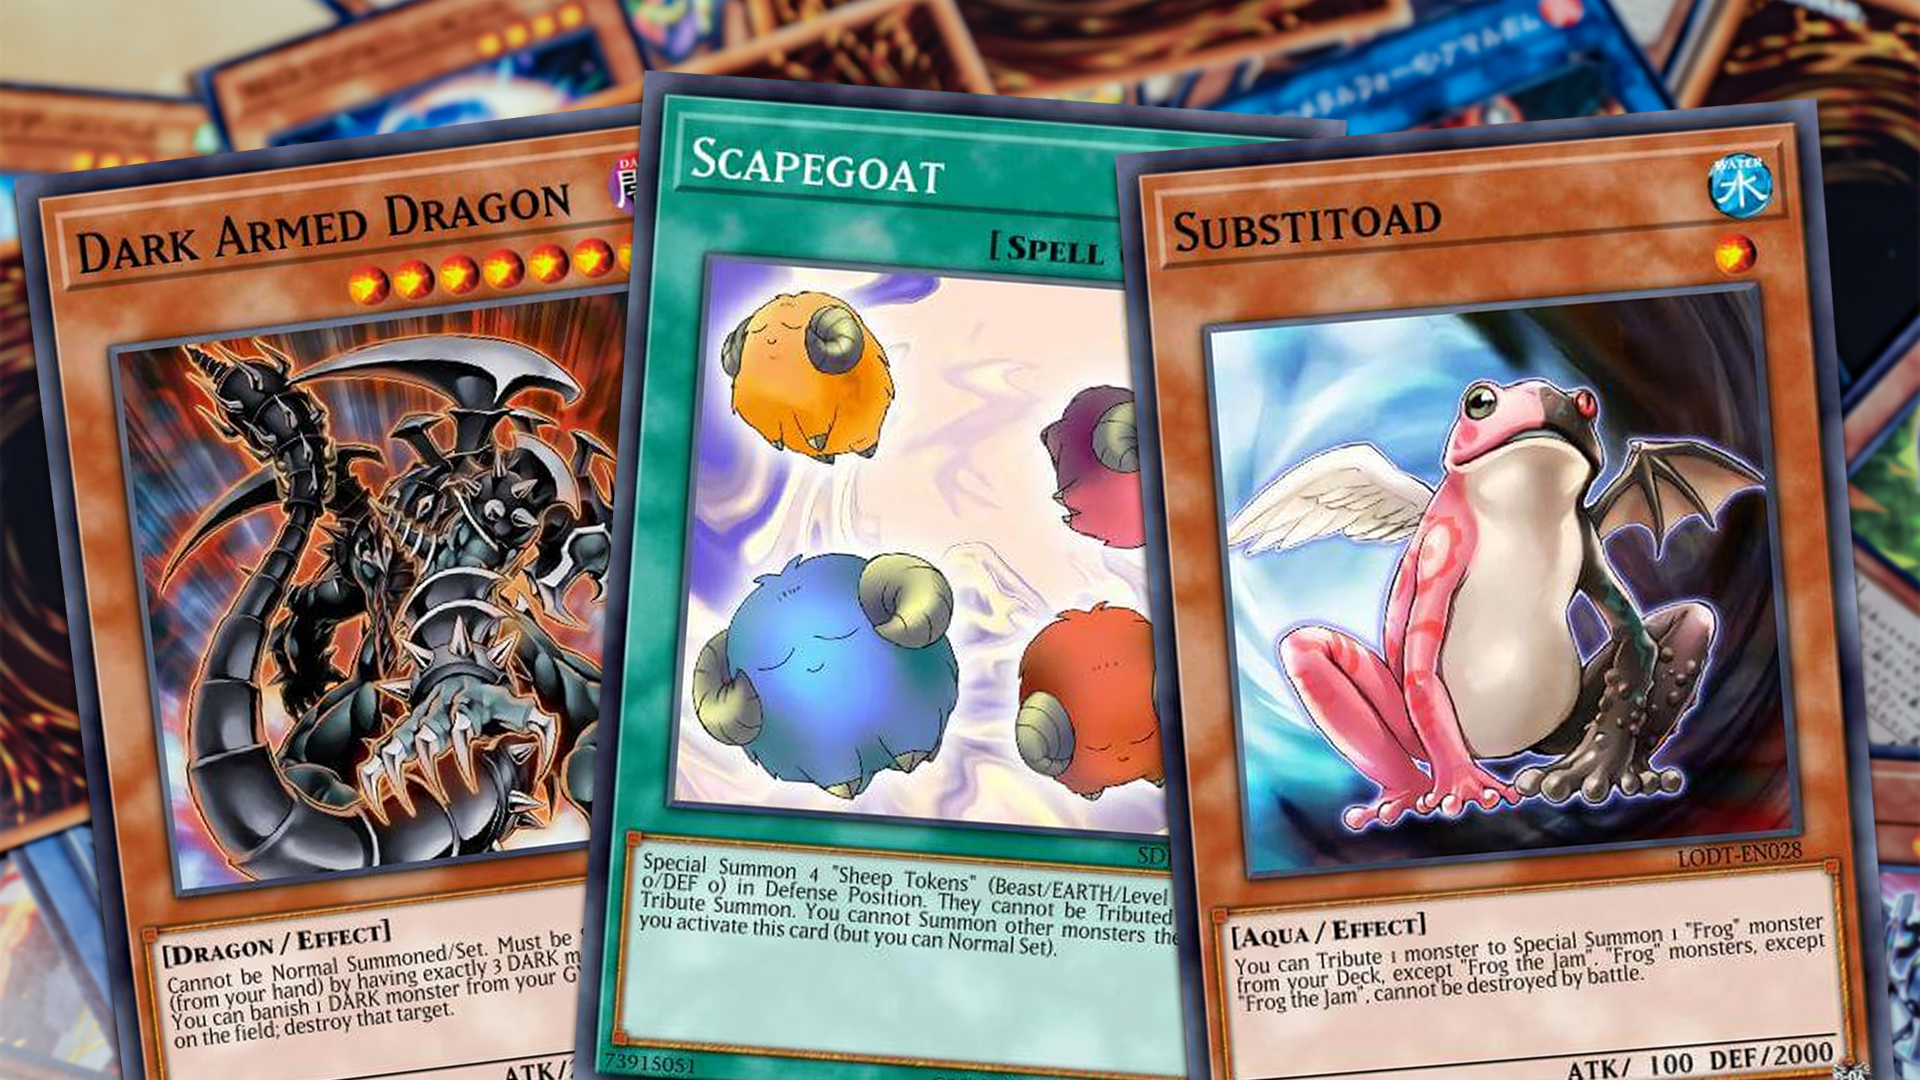 Dark Armed Dragon, Sacegoat and Substitoad Yu-Gi-Oh! cards in front of a blurred game of Yu-Gi-Oh!